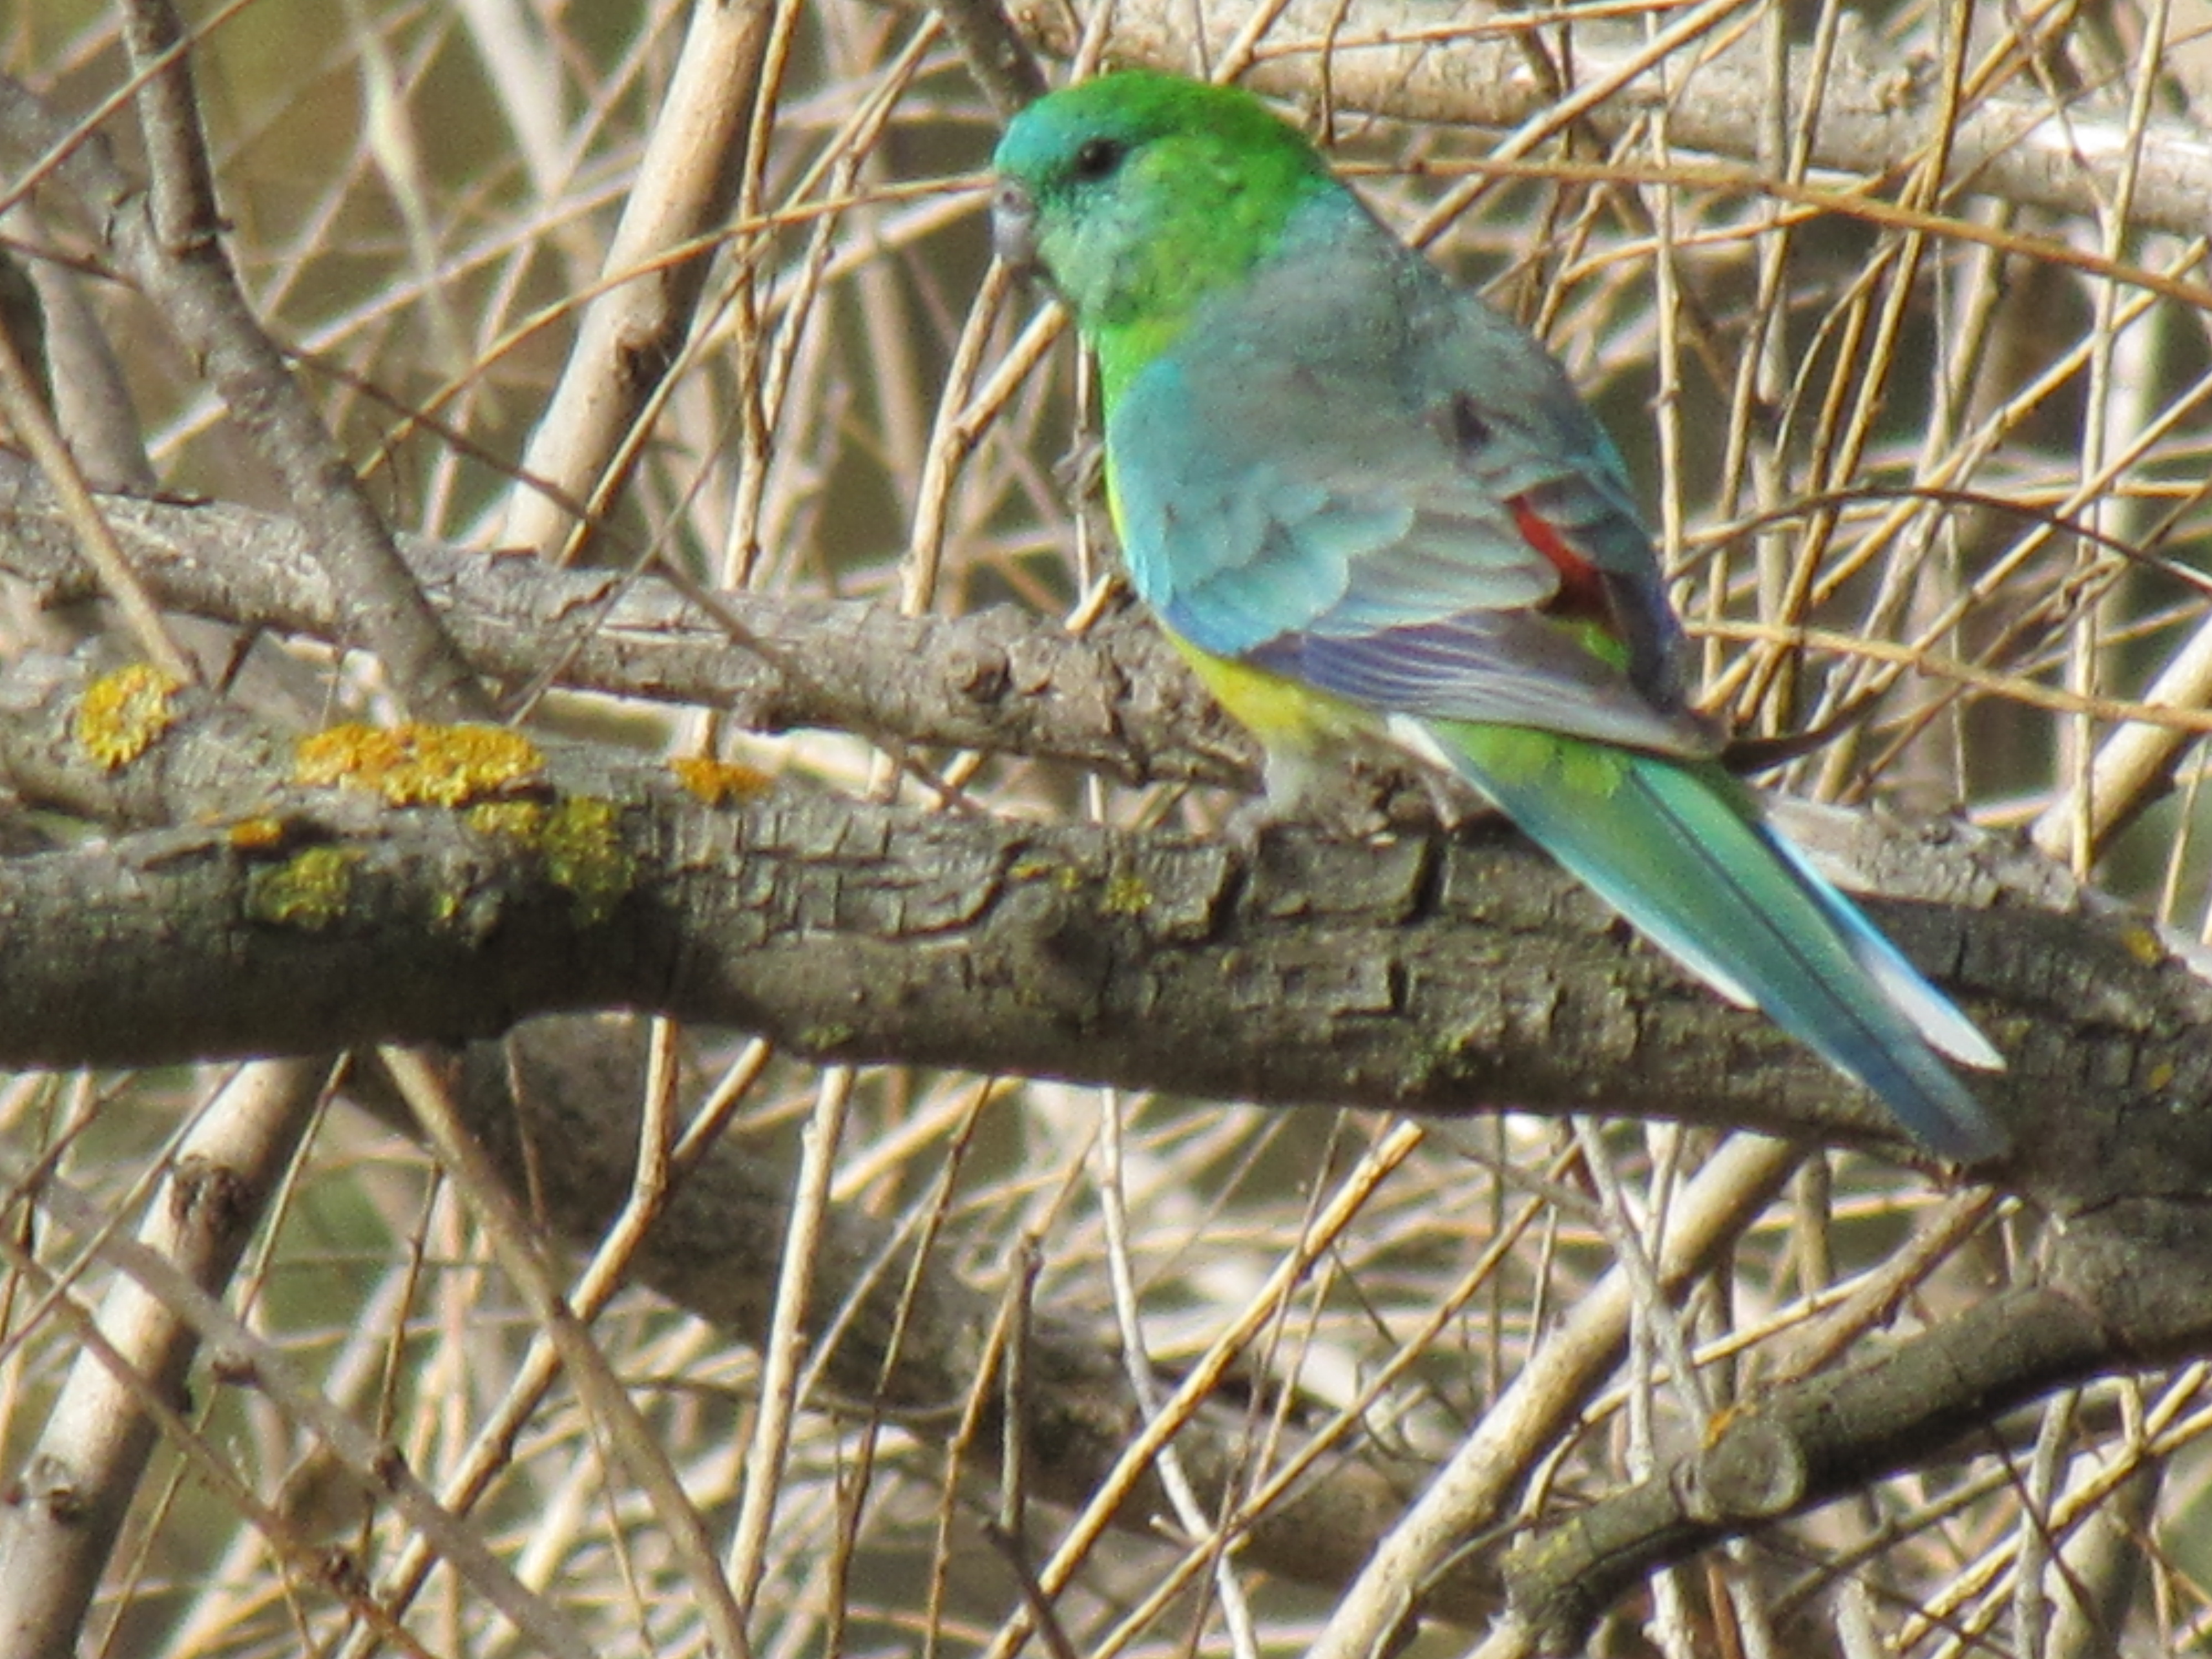 red rumped parrot